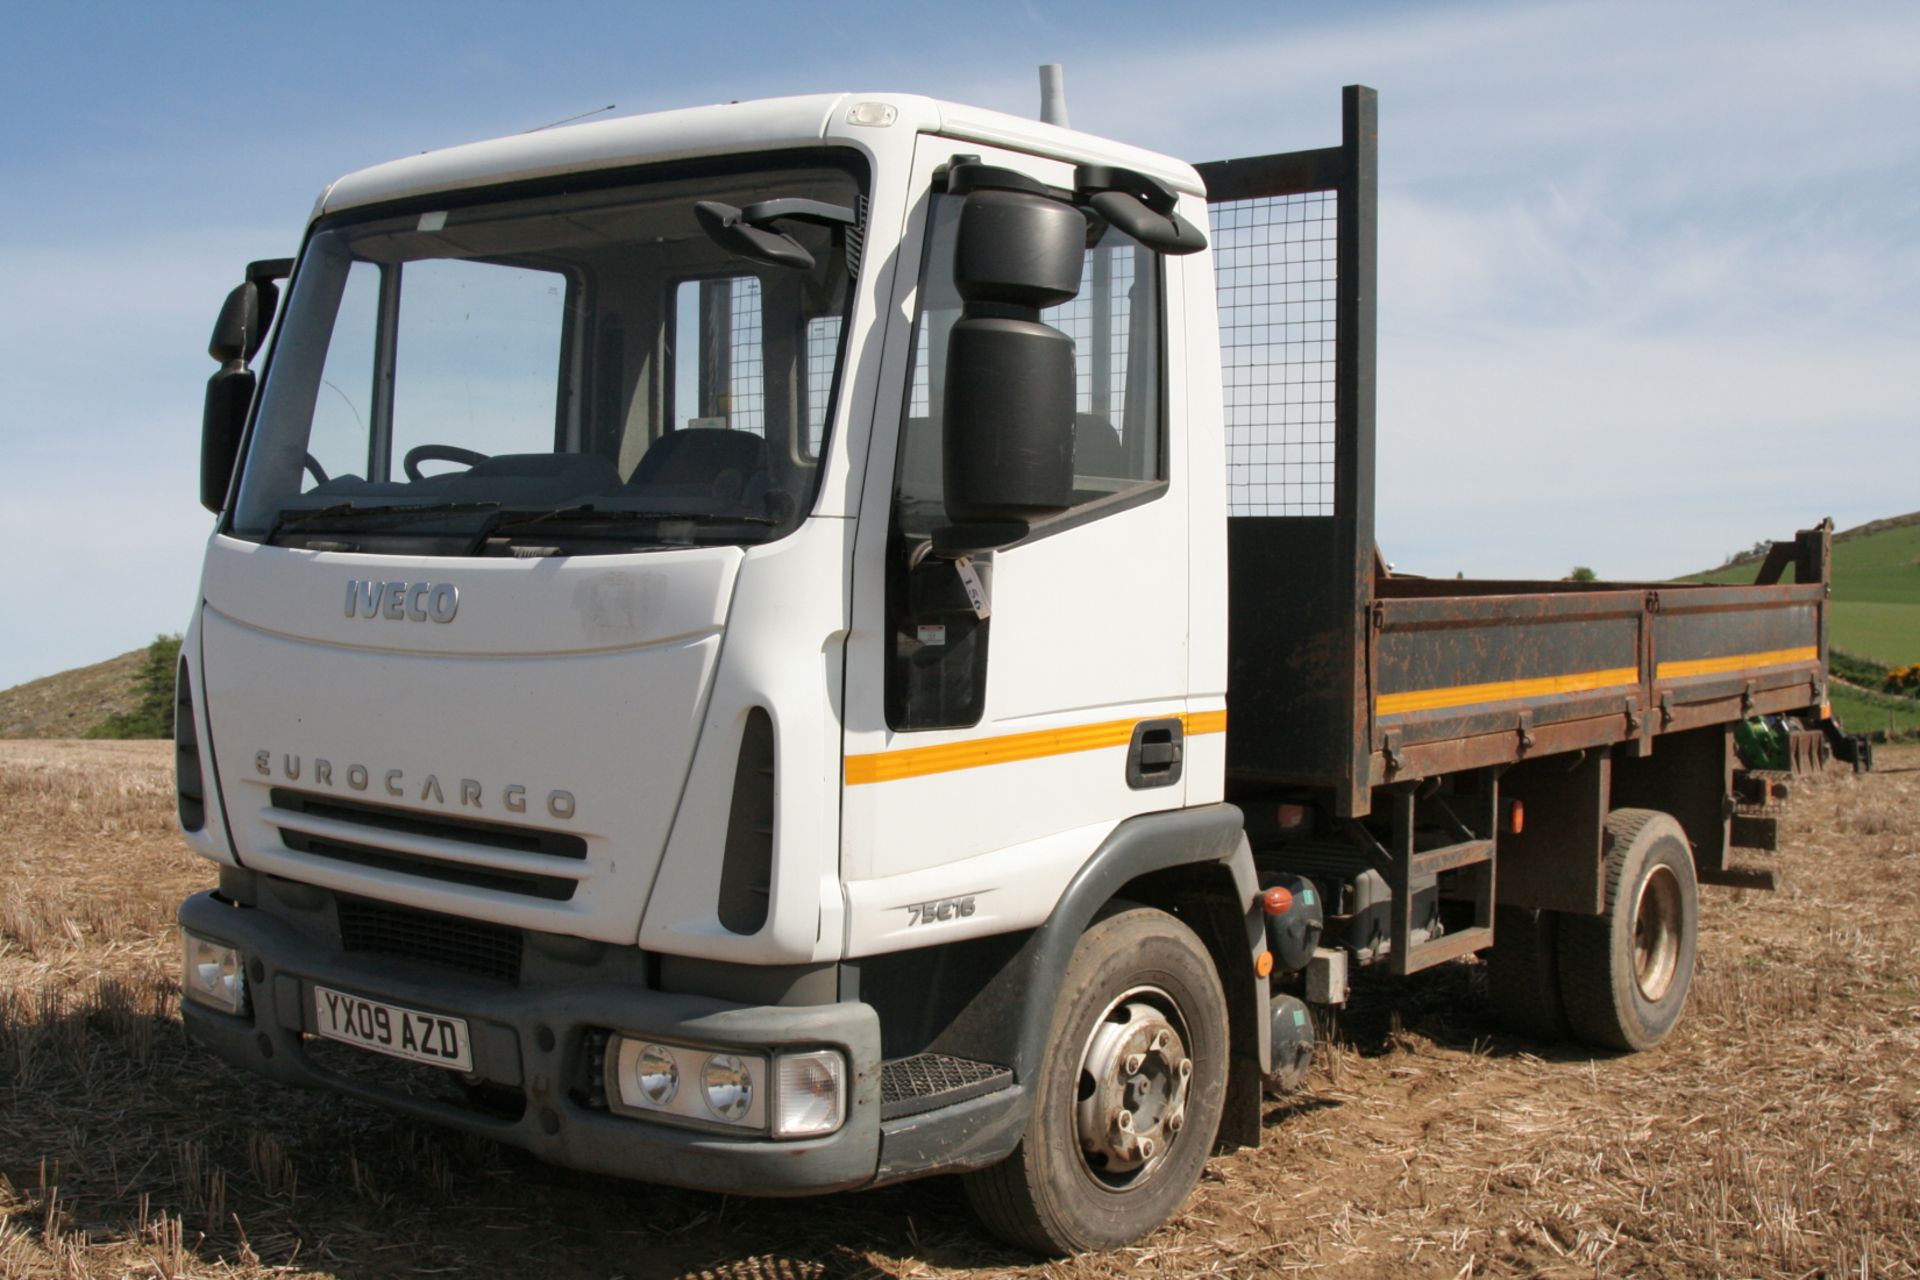 Ivedco Eurocargo Tipper Lorry YX09 AZD - Image 2 of 8